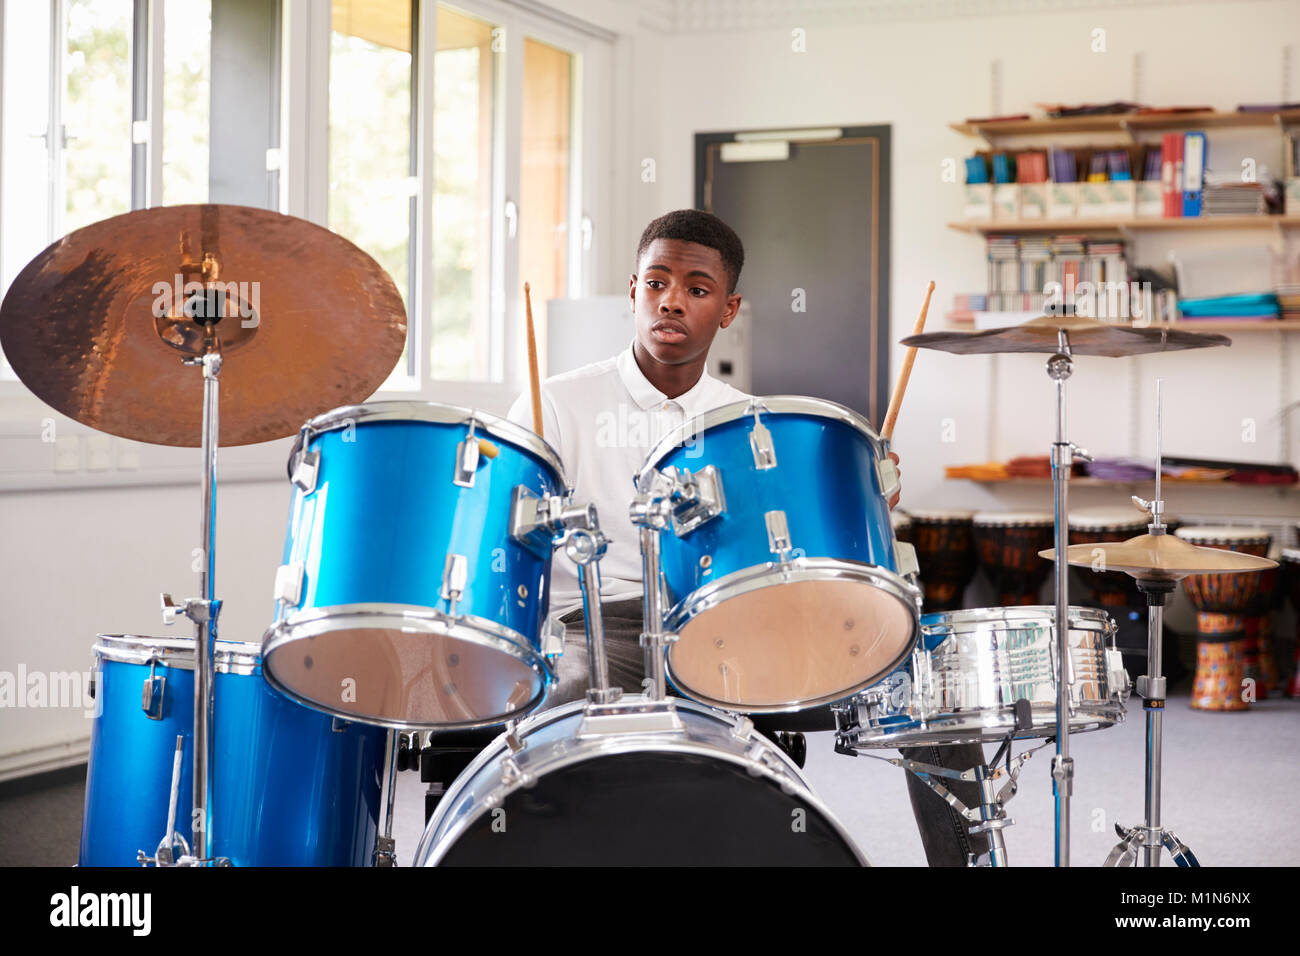 Male Teenage Pupil Playing Drums In Music Lesson Stock Photo